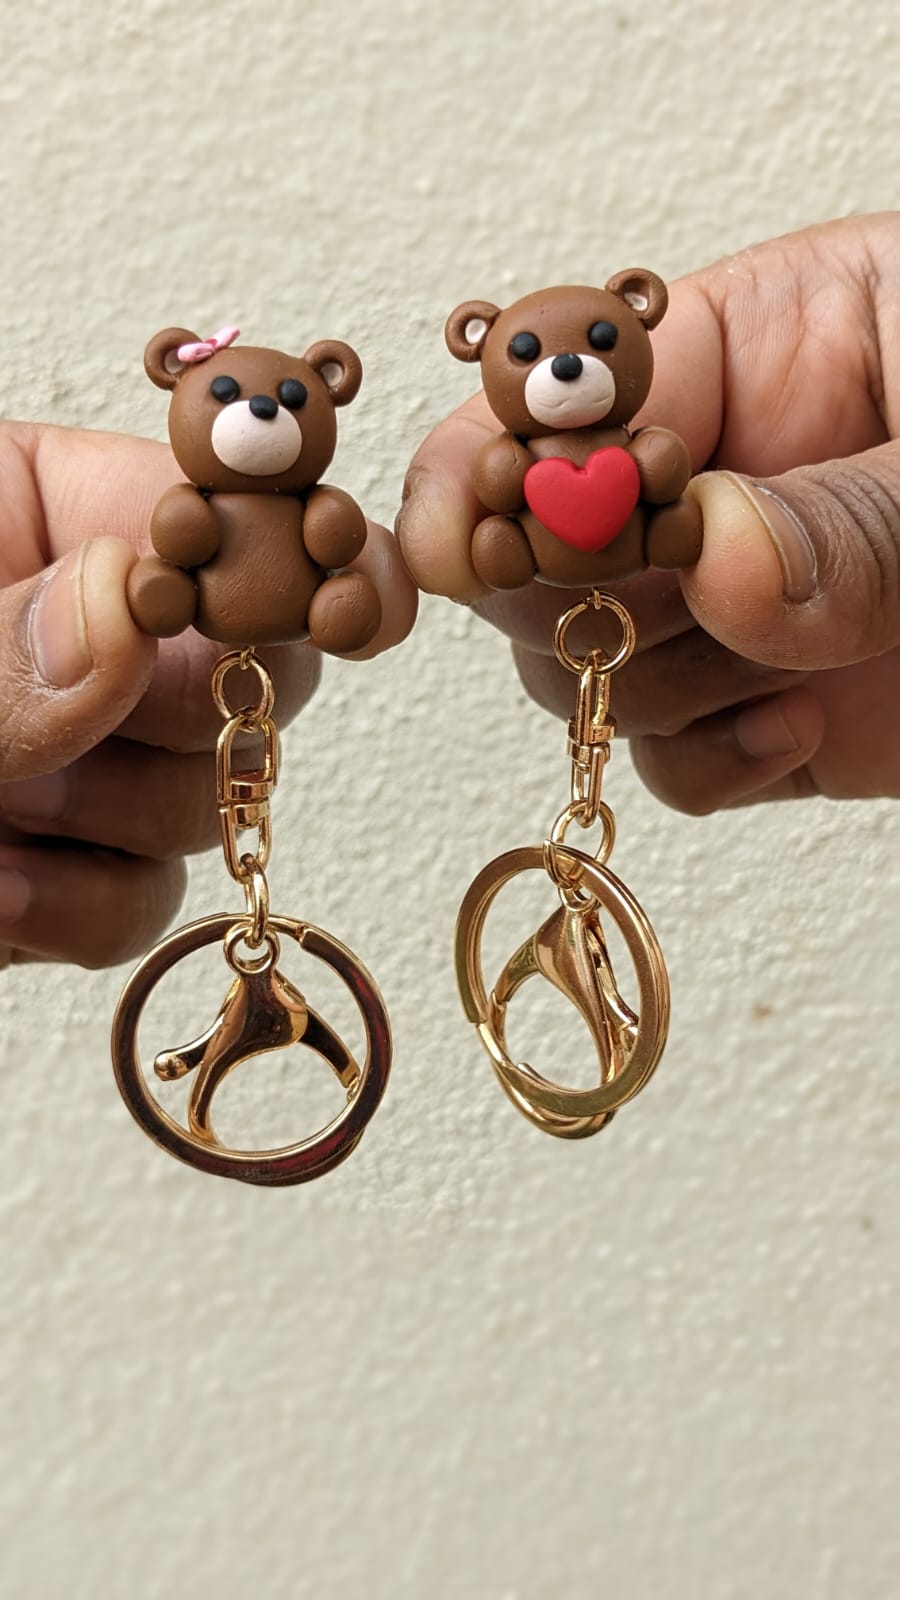 Pair of key chains for him and her